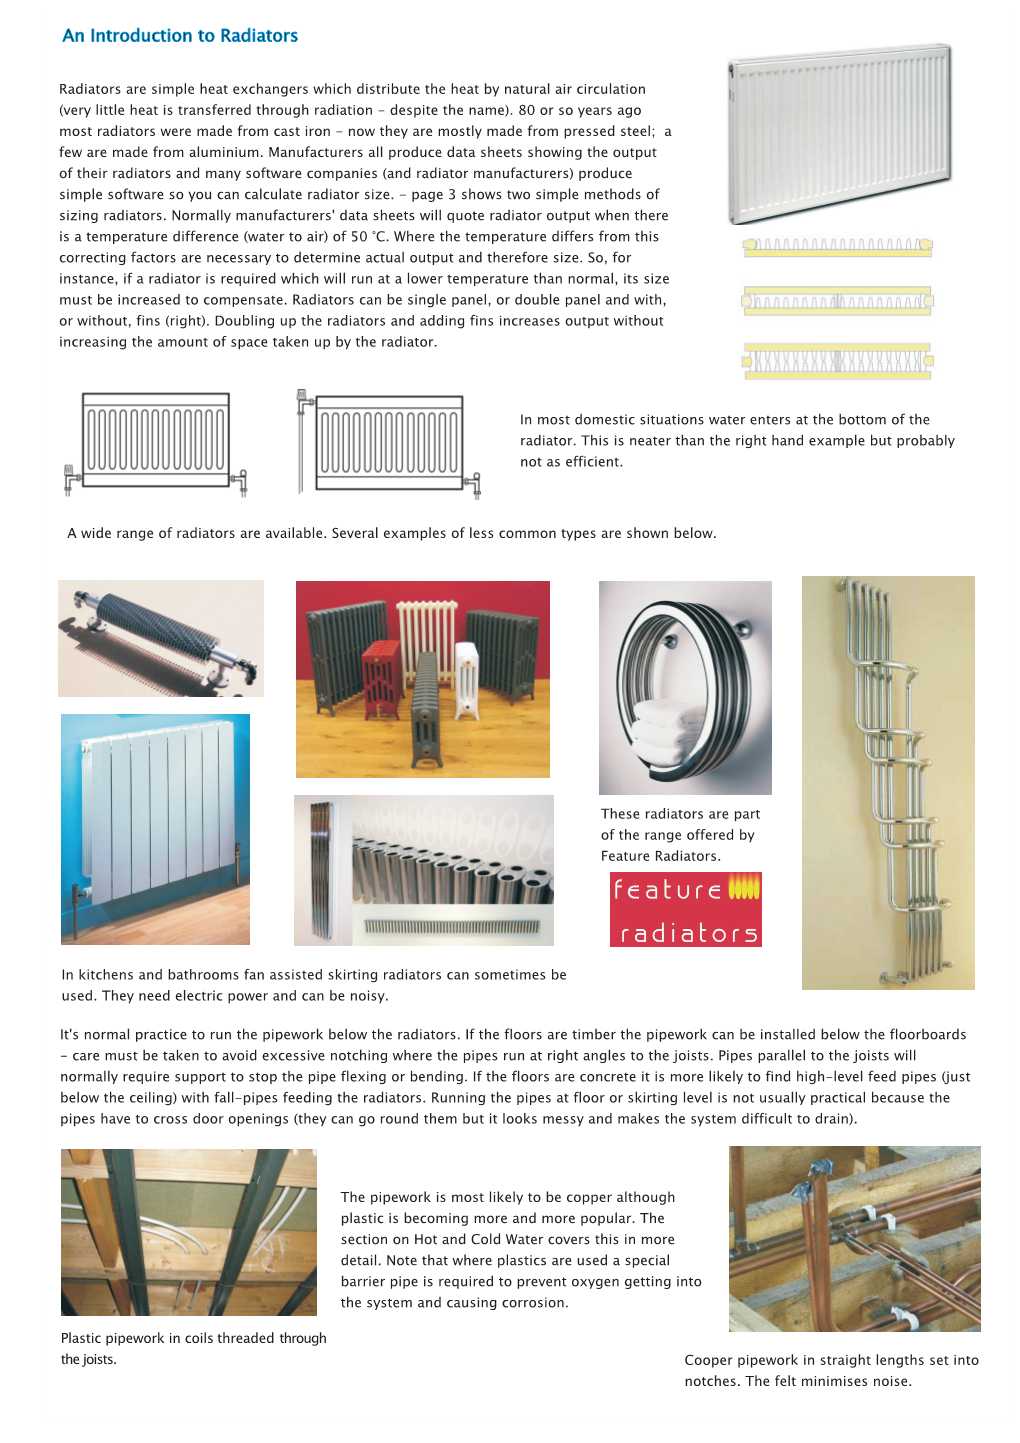 An Introduction to Radiators